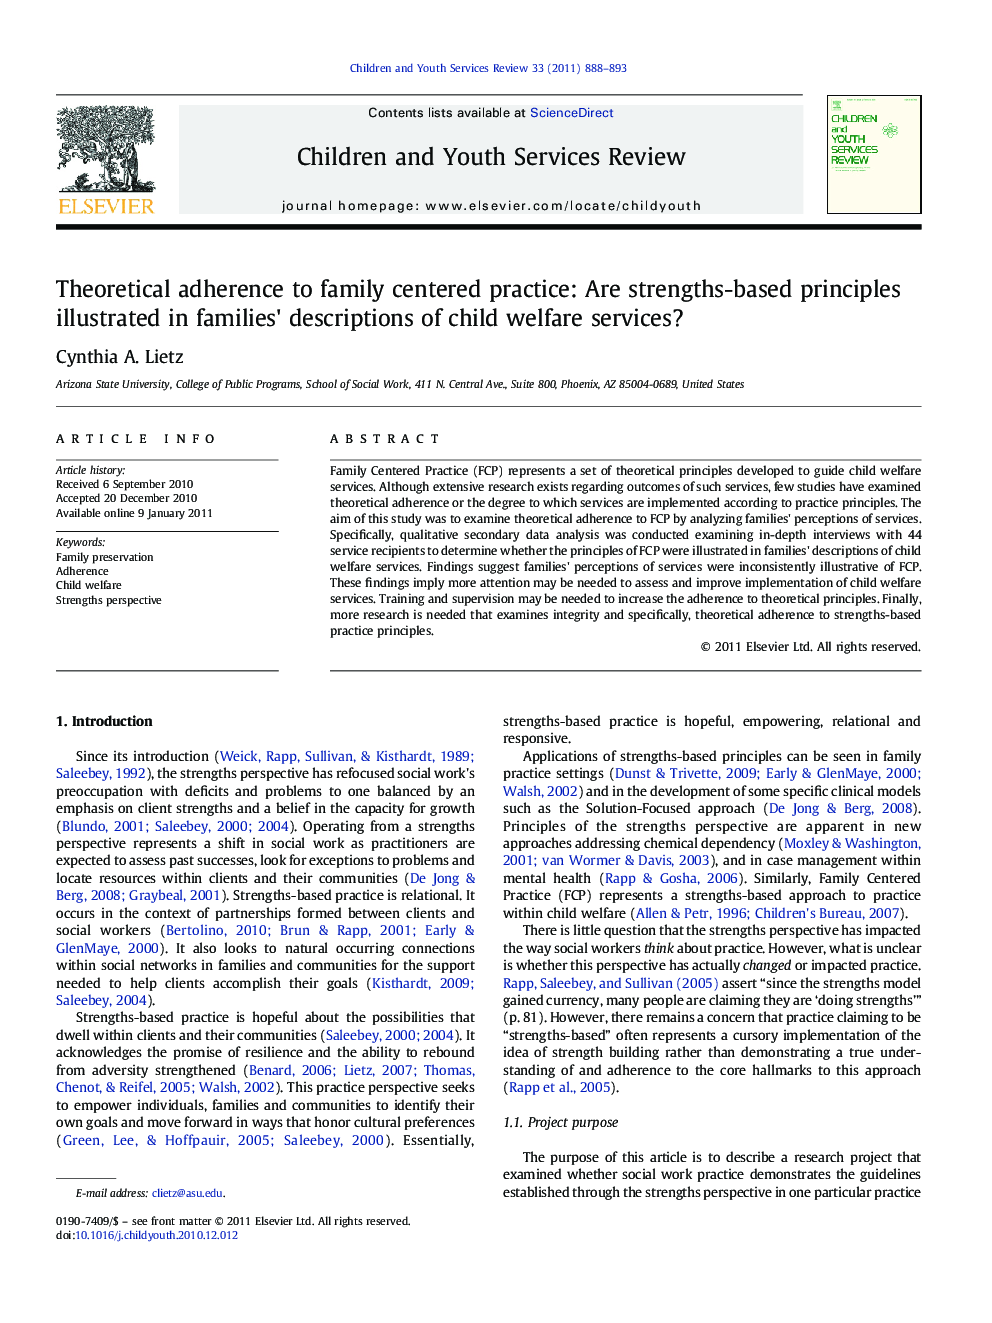 Theoretical adherence to family centered practice: Are strengths-based principles illustrated in families' descriptions of child welfare services?